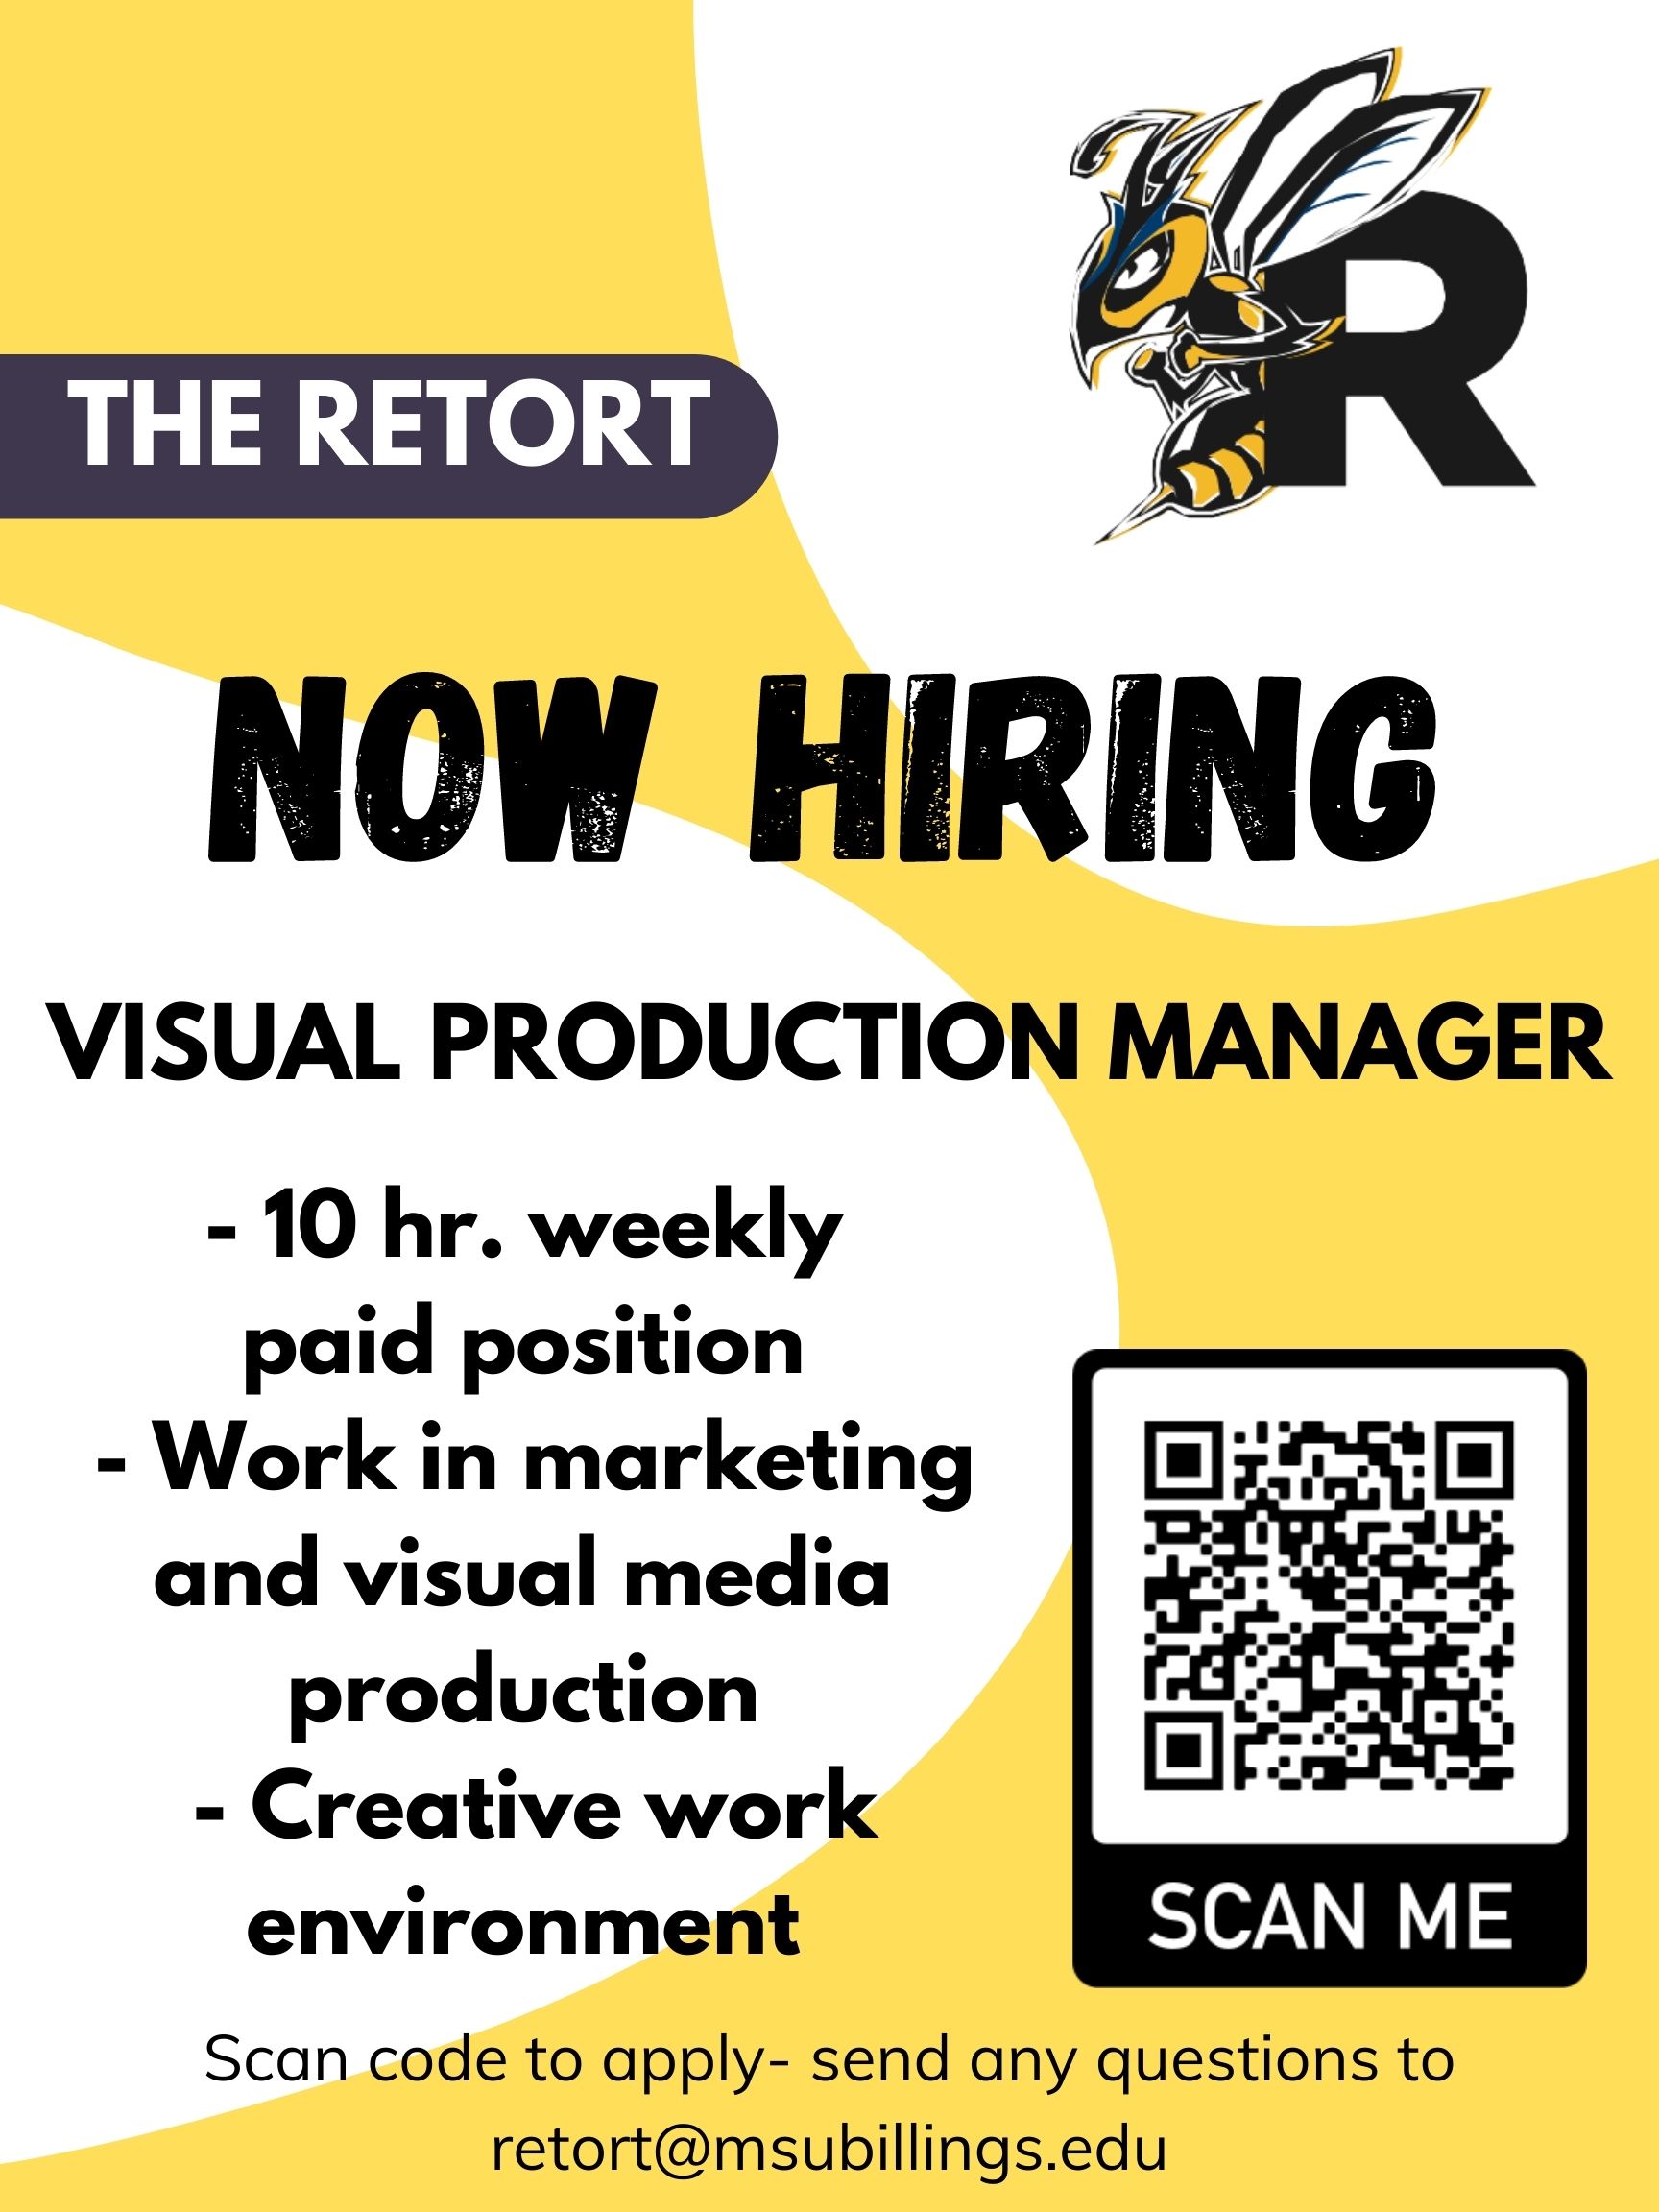 The Retort now hiring Visual Production Manager: 10 hr weekly paid position, work in marketing and visual media production, creative work environment